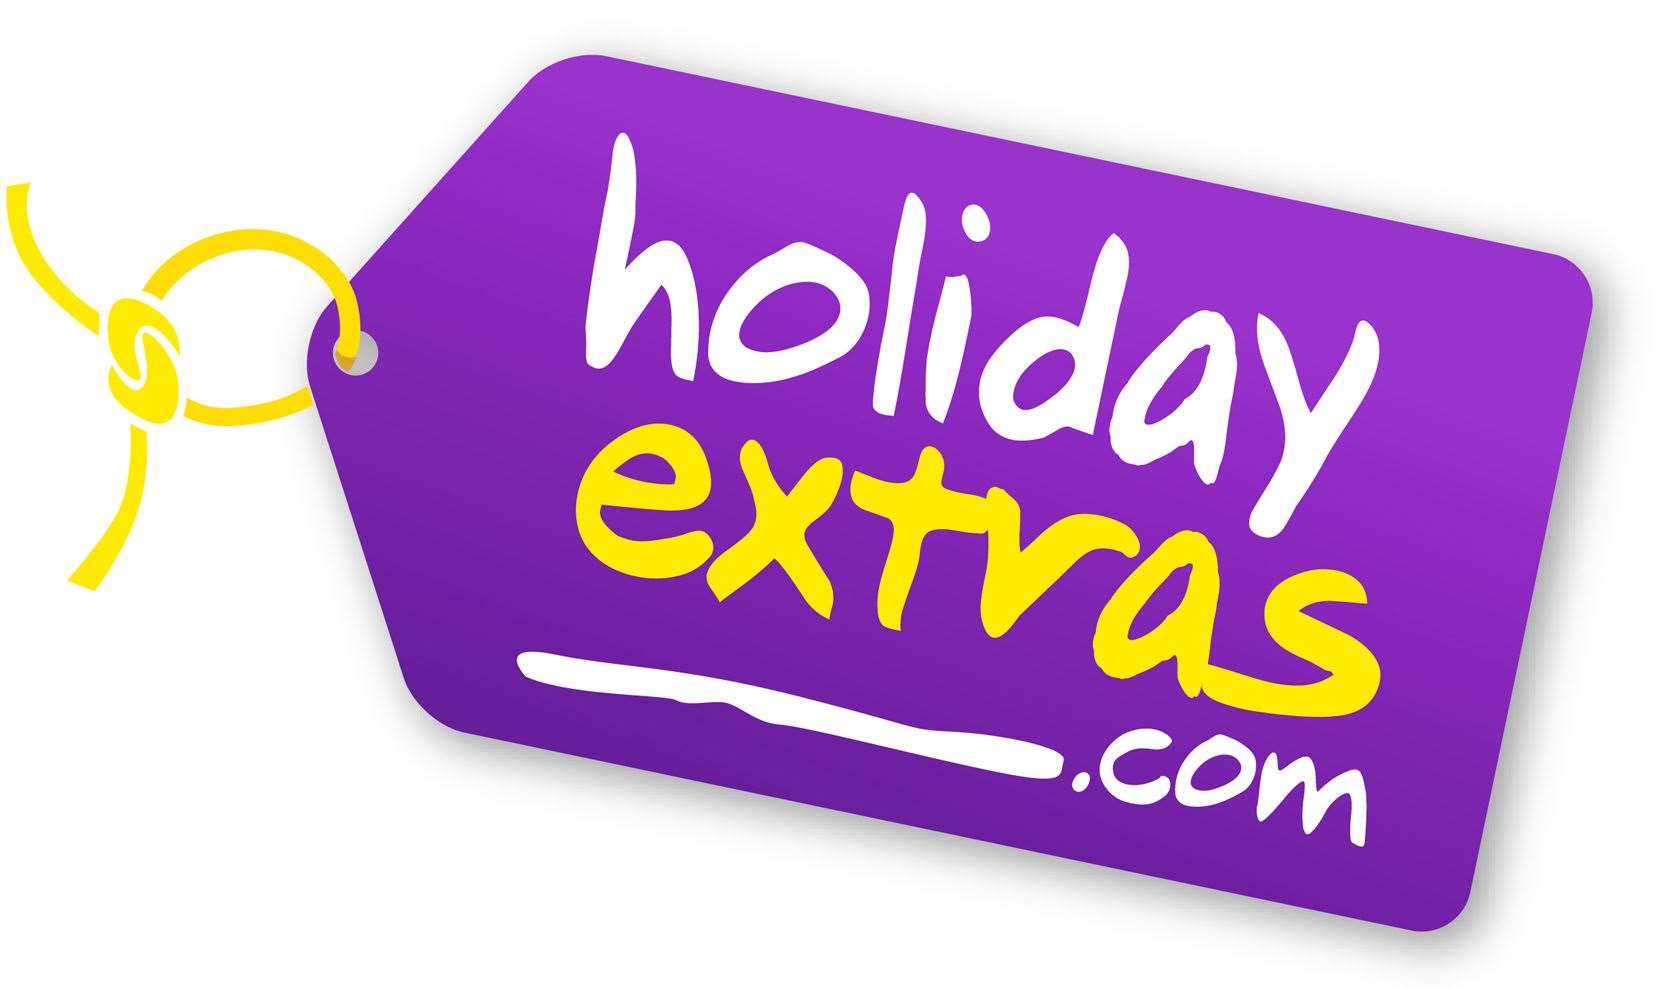 Holiday Extras has had to release more than 300 staff